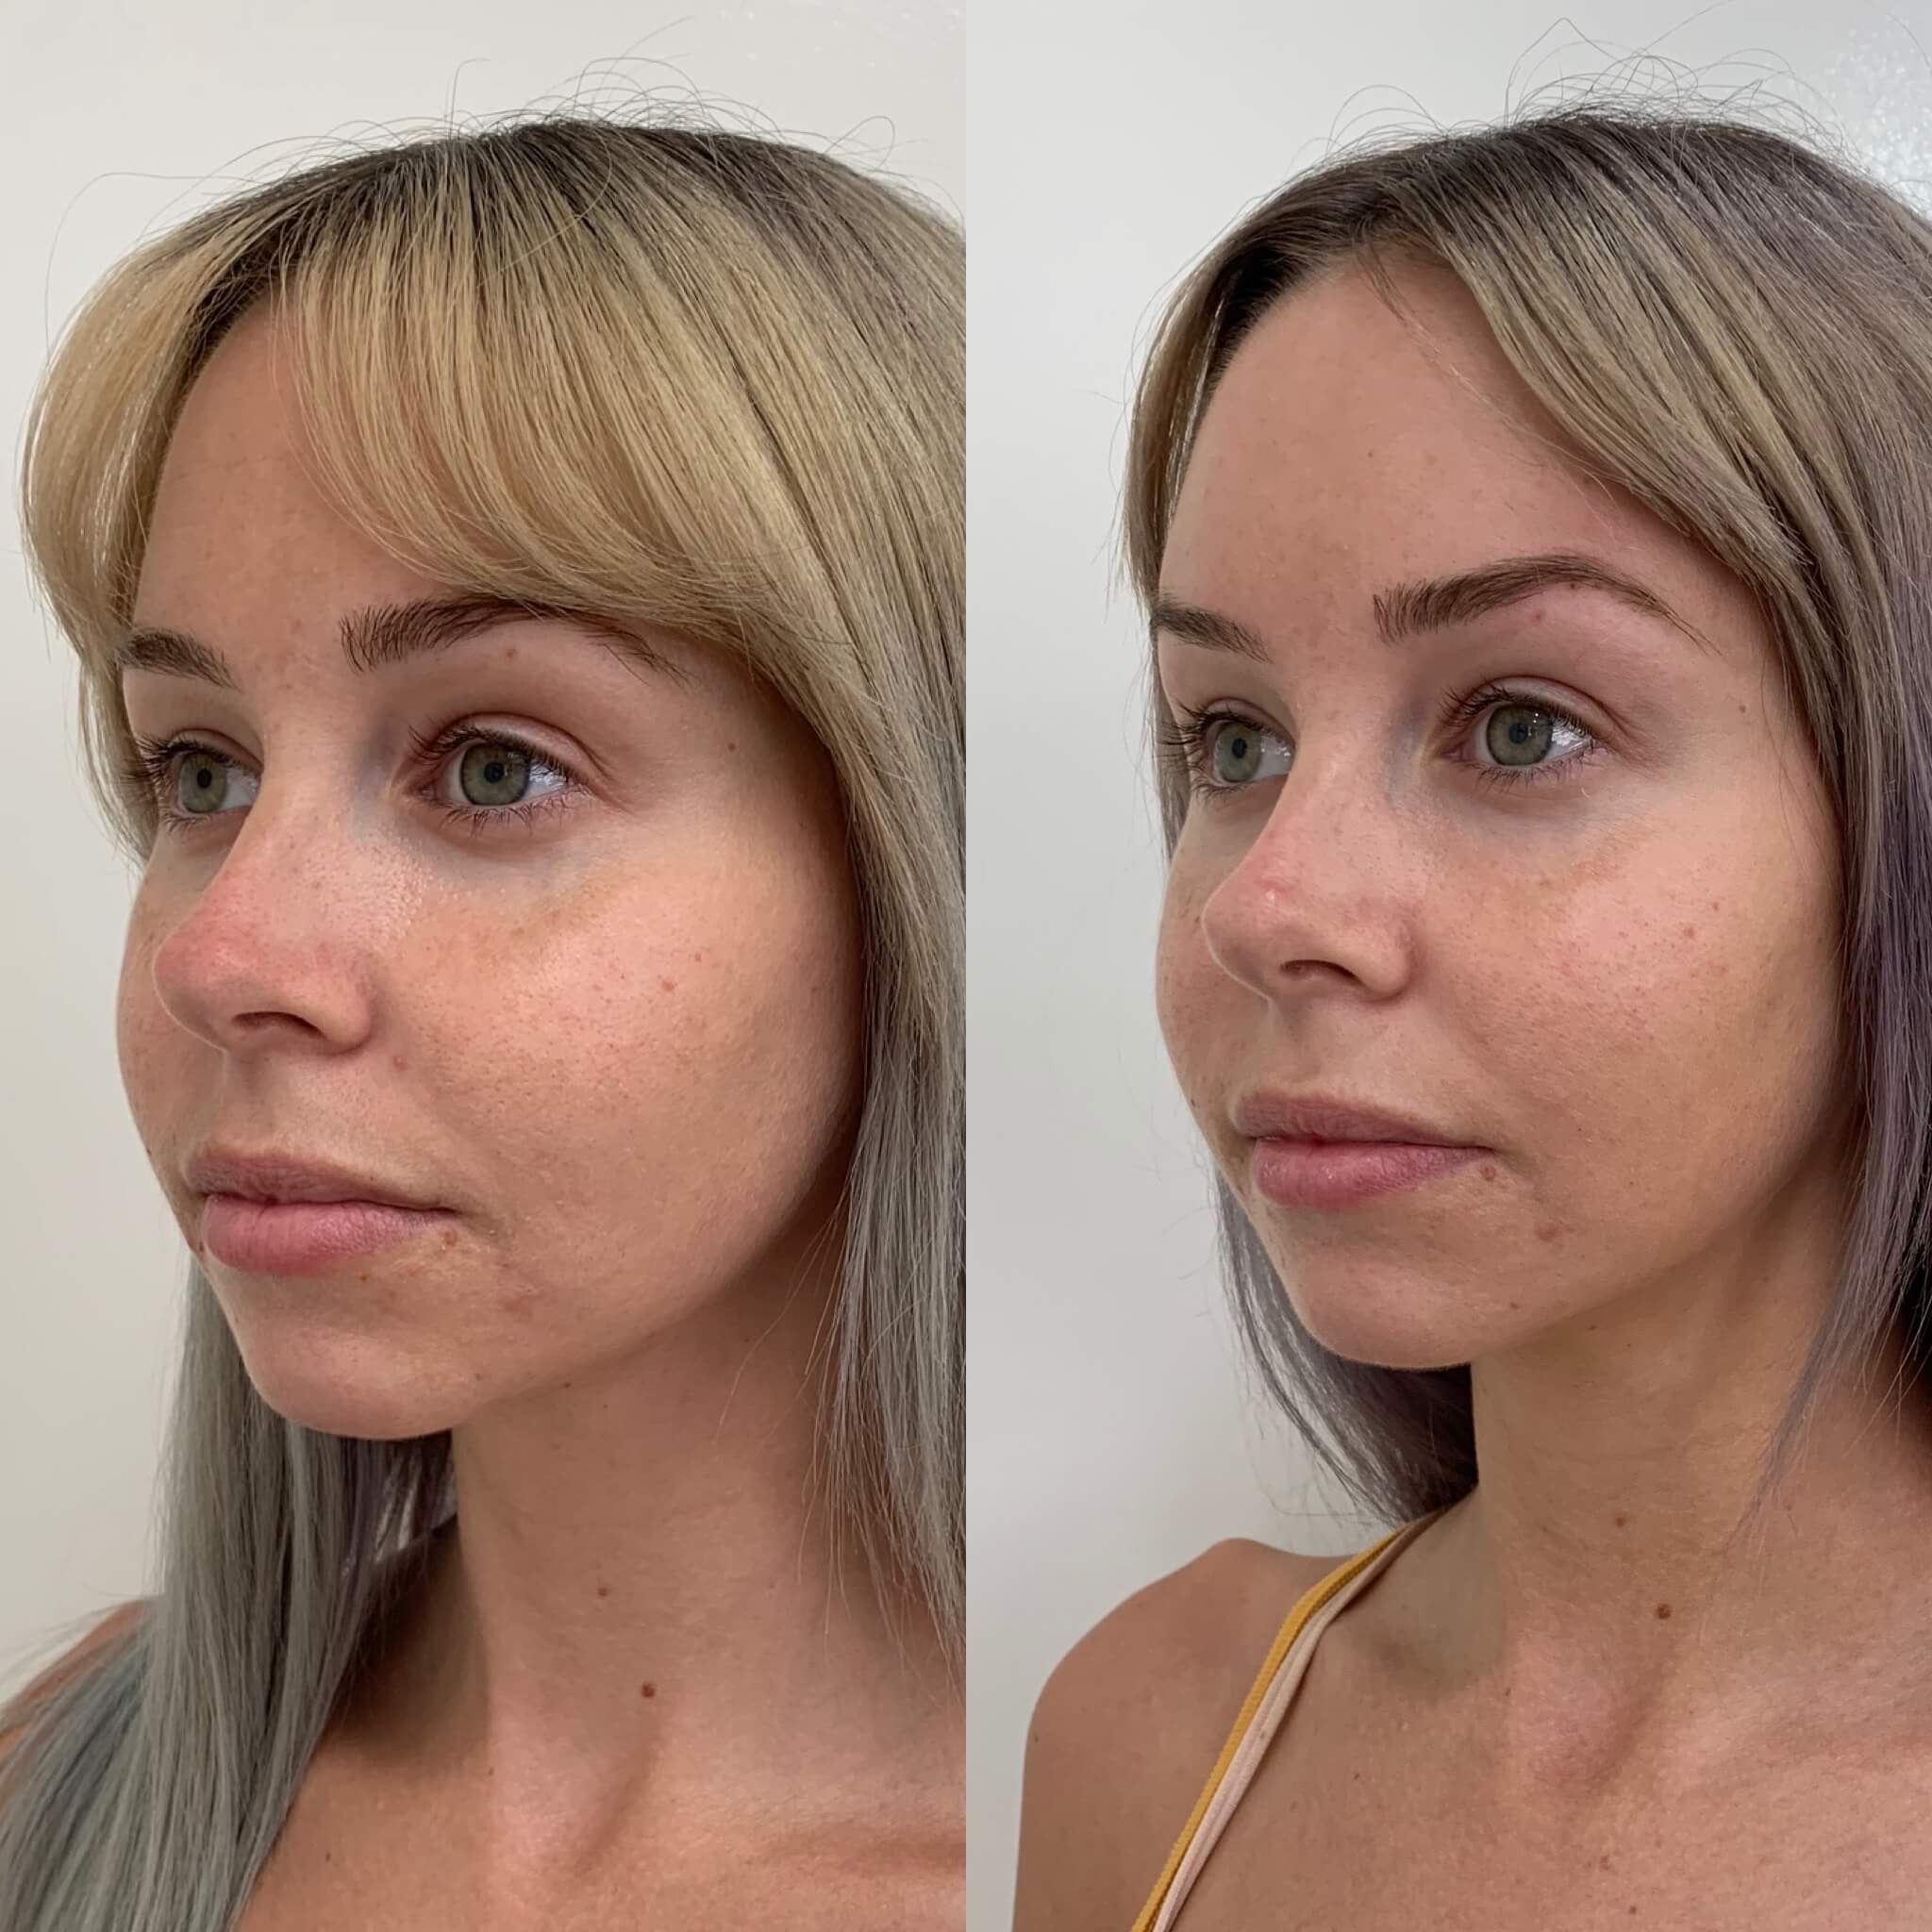 Before and After PDO Thread lift Treatment | Beauty Boost Med Spa in Newport Beach, CA